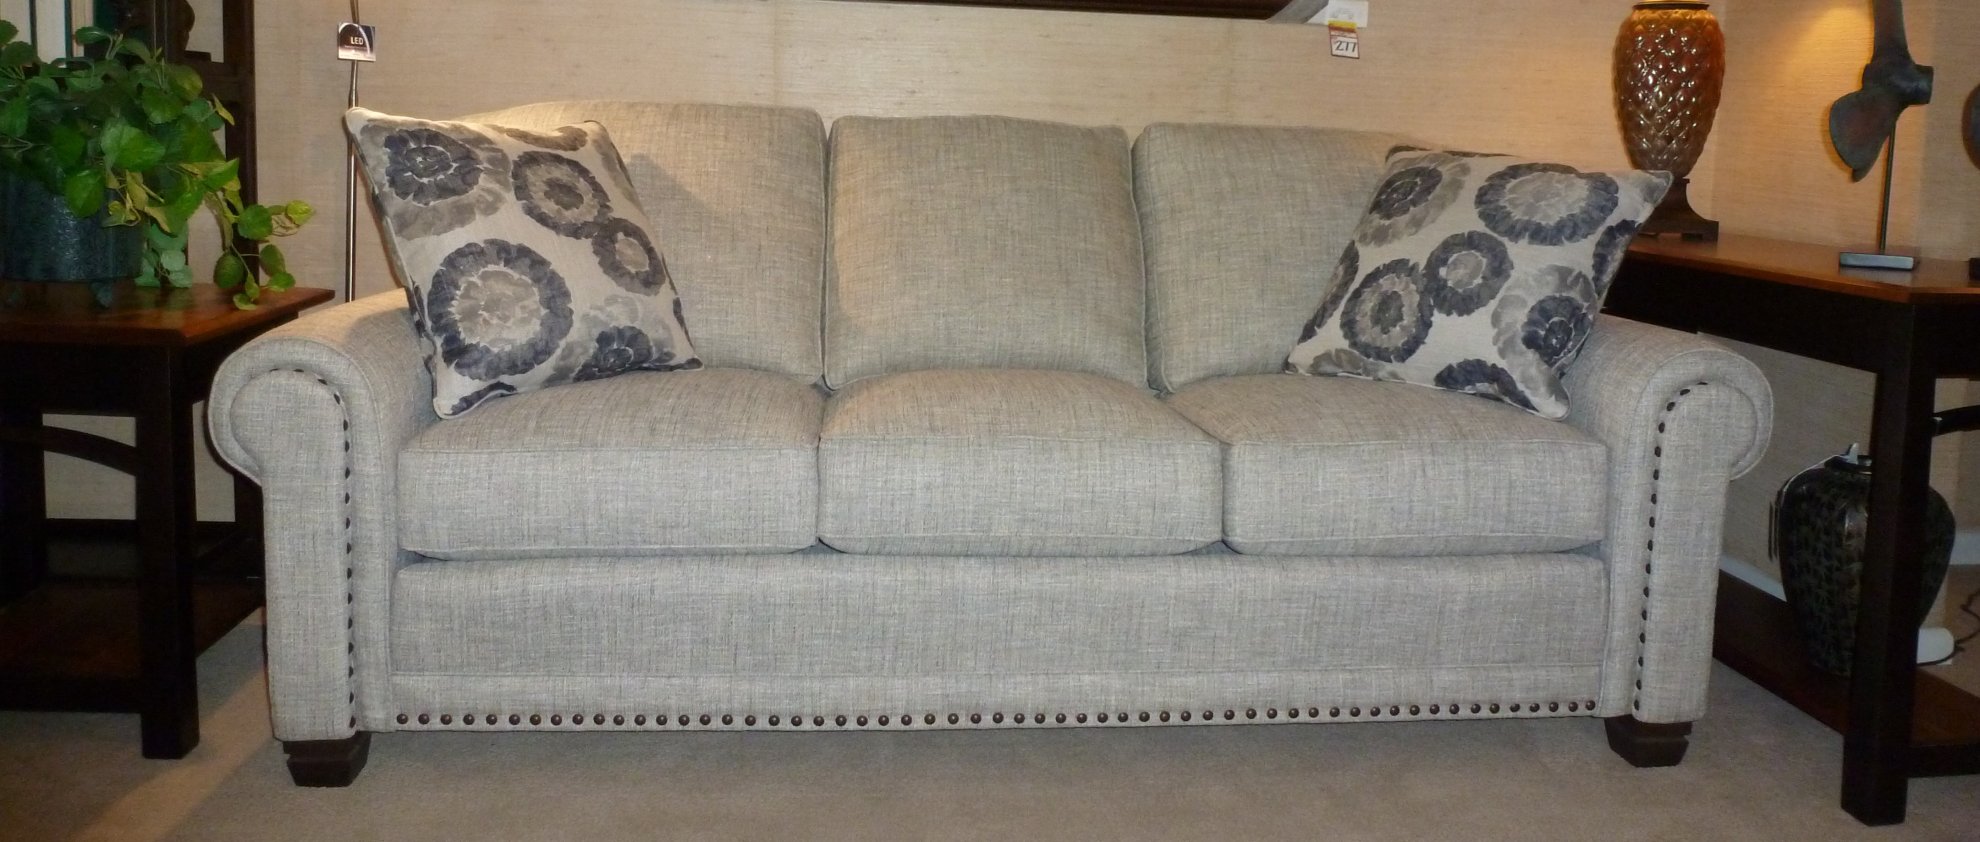 Rogers City Home Furnishings Smith Brothers Sofa